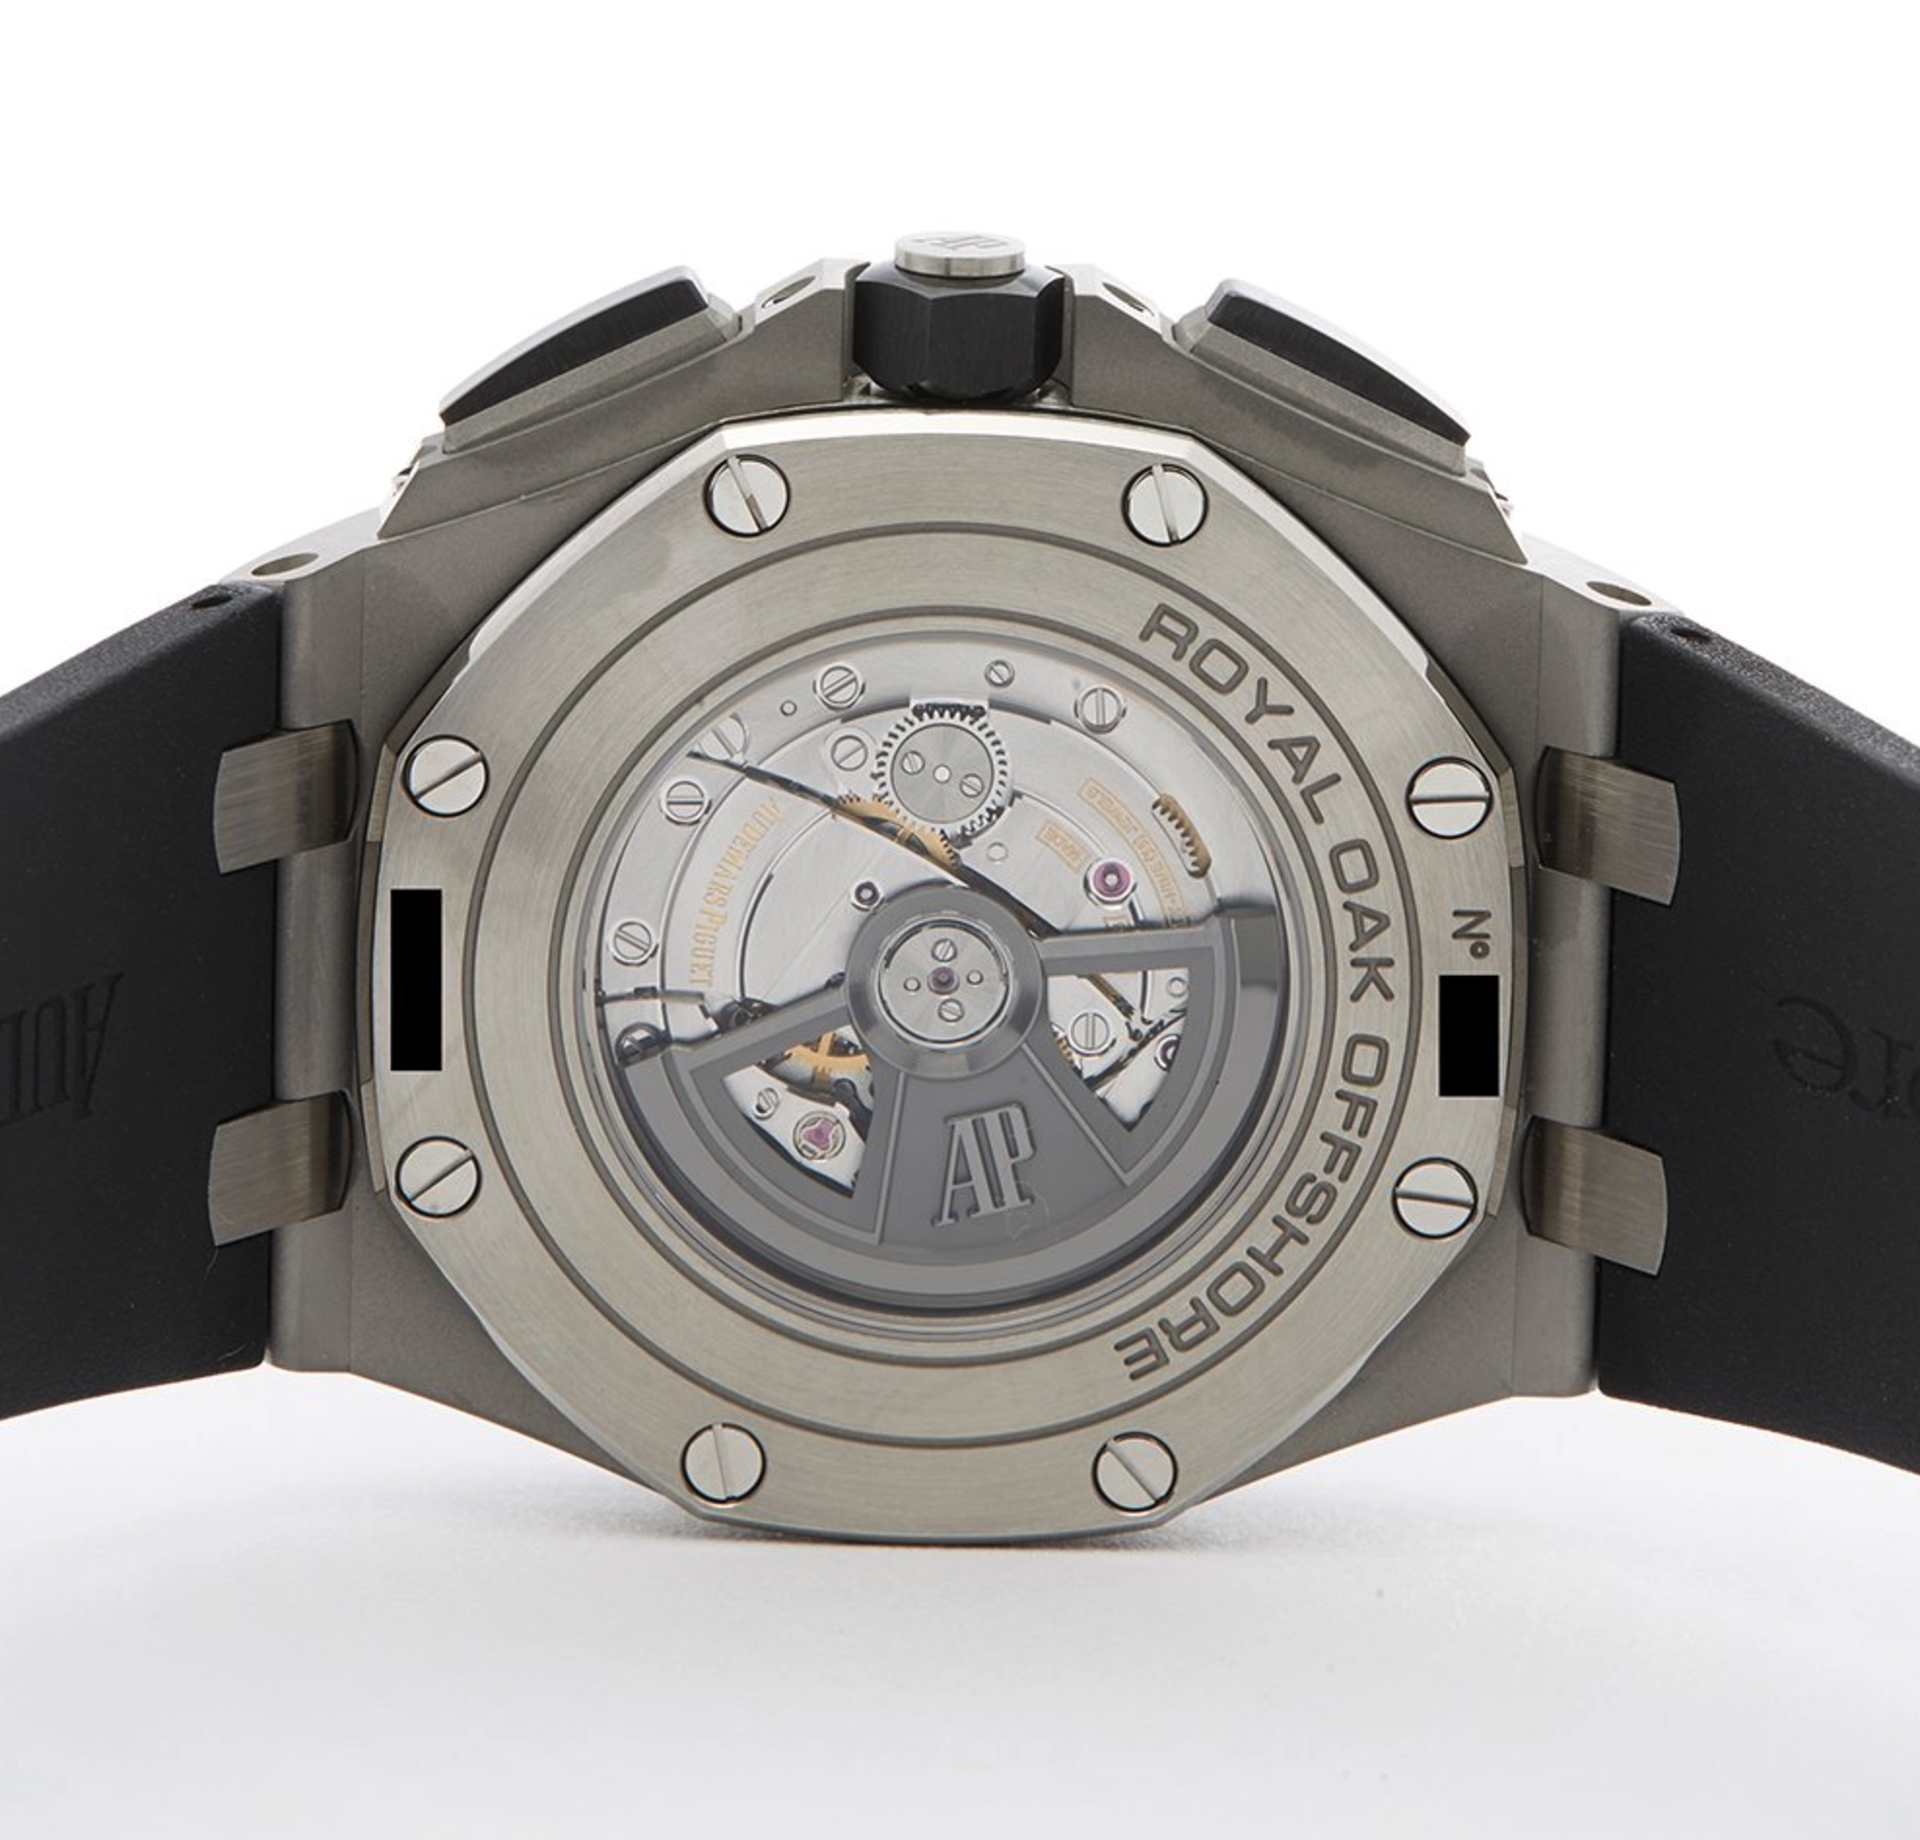 Audemars Piguet Royal Oak Offshore Stainless Steel - 26400SO.OO.A002CA.01 - Image 7 of 8